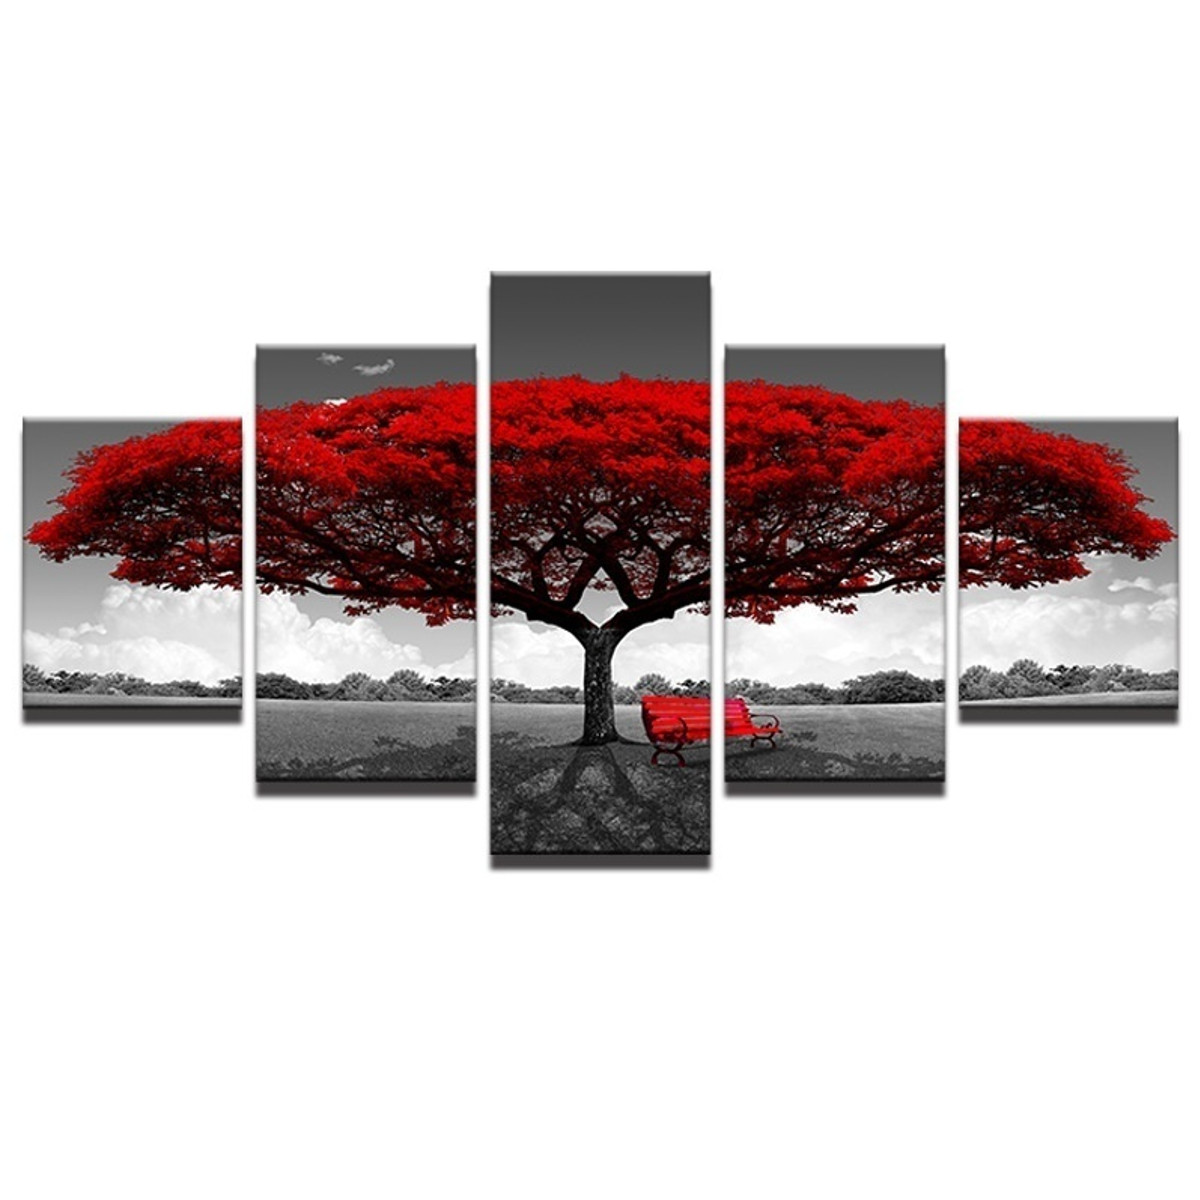 5Pcs-Red-Tree-Canvas-Paintings-Wall-Decorative-Print-Art-Pictures-Unframed-Wall-Hanging-Home-Office--1774551-2